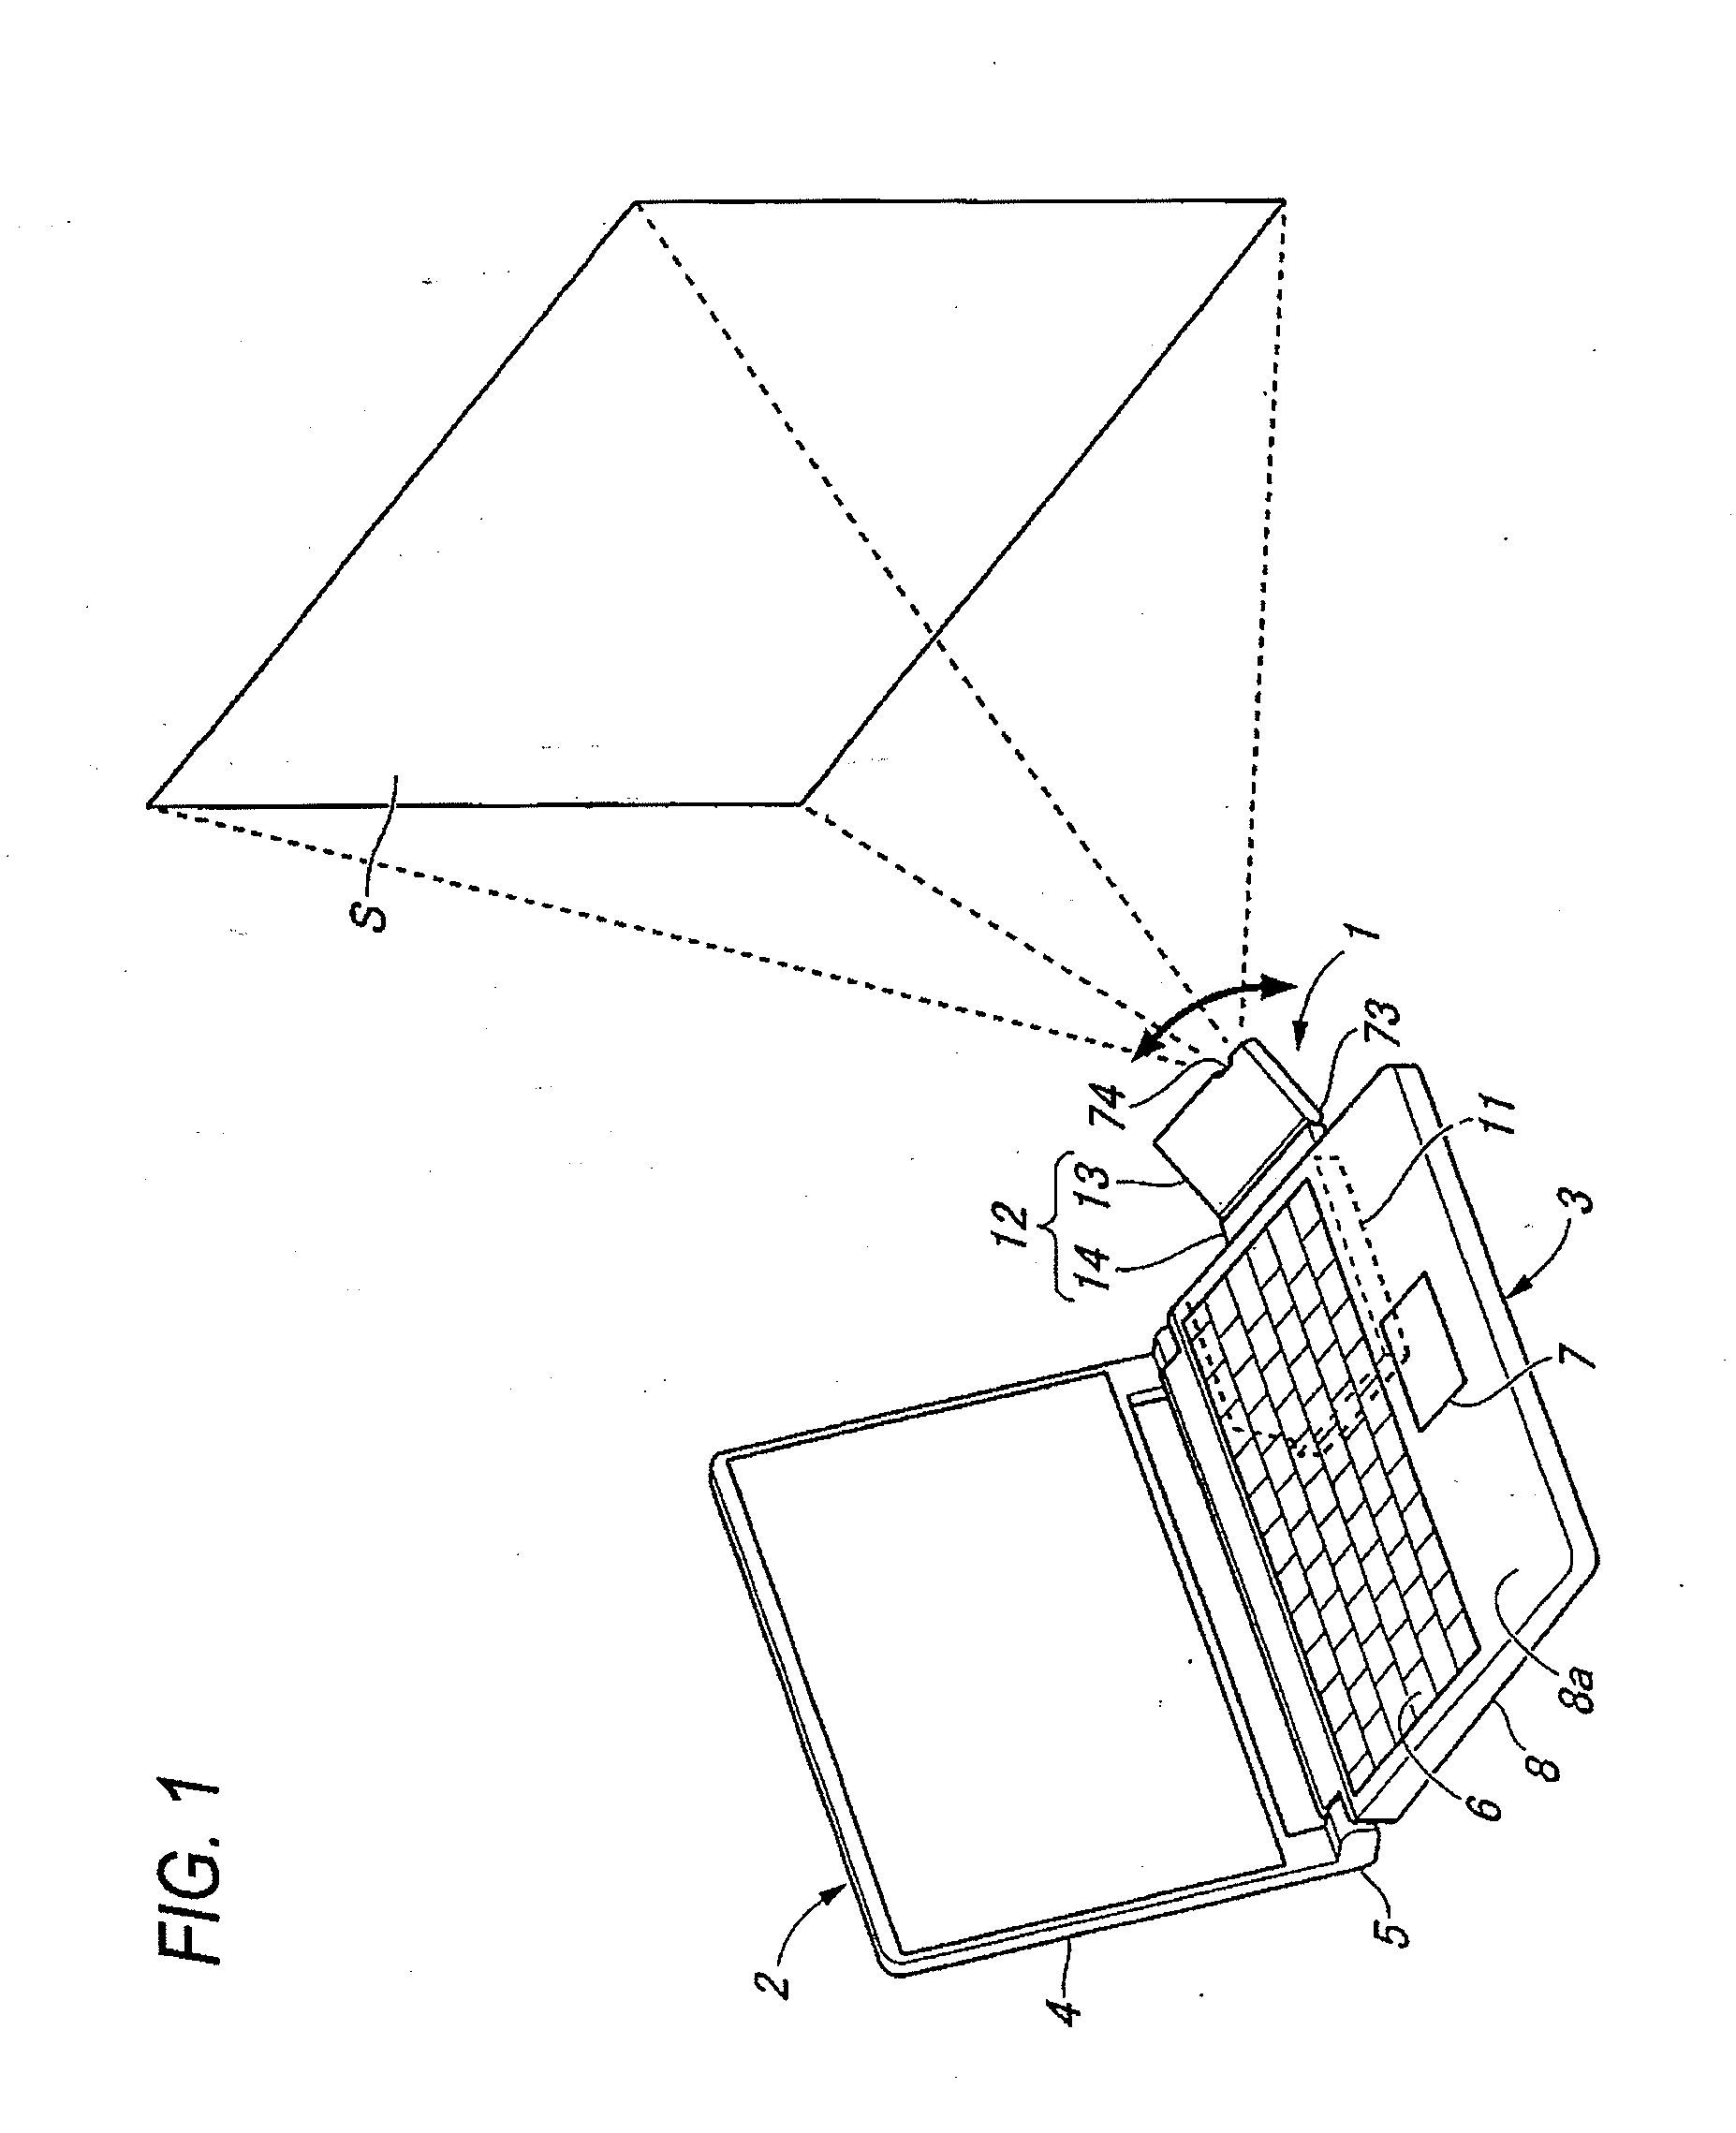 Image display device and information processing apparatus including the same